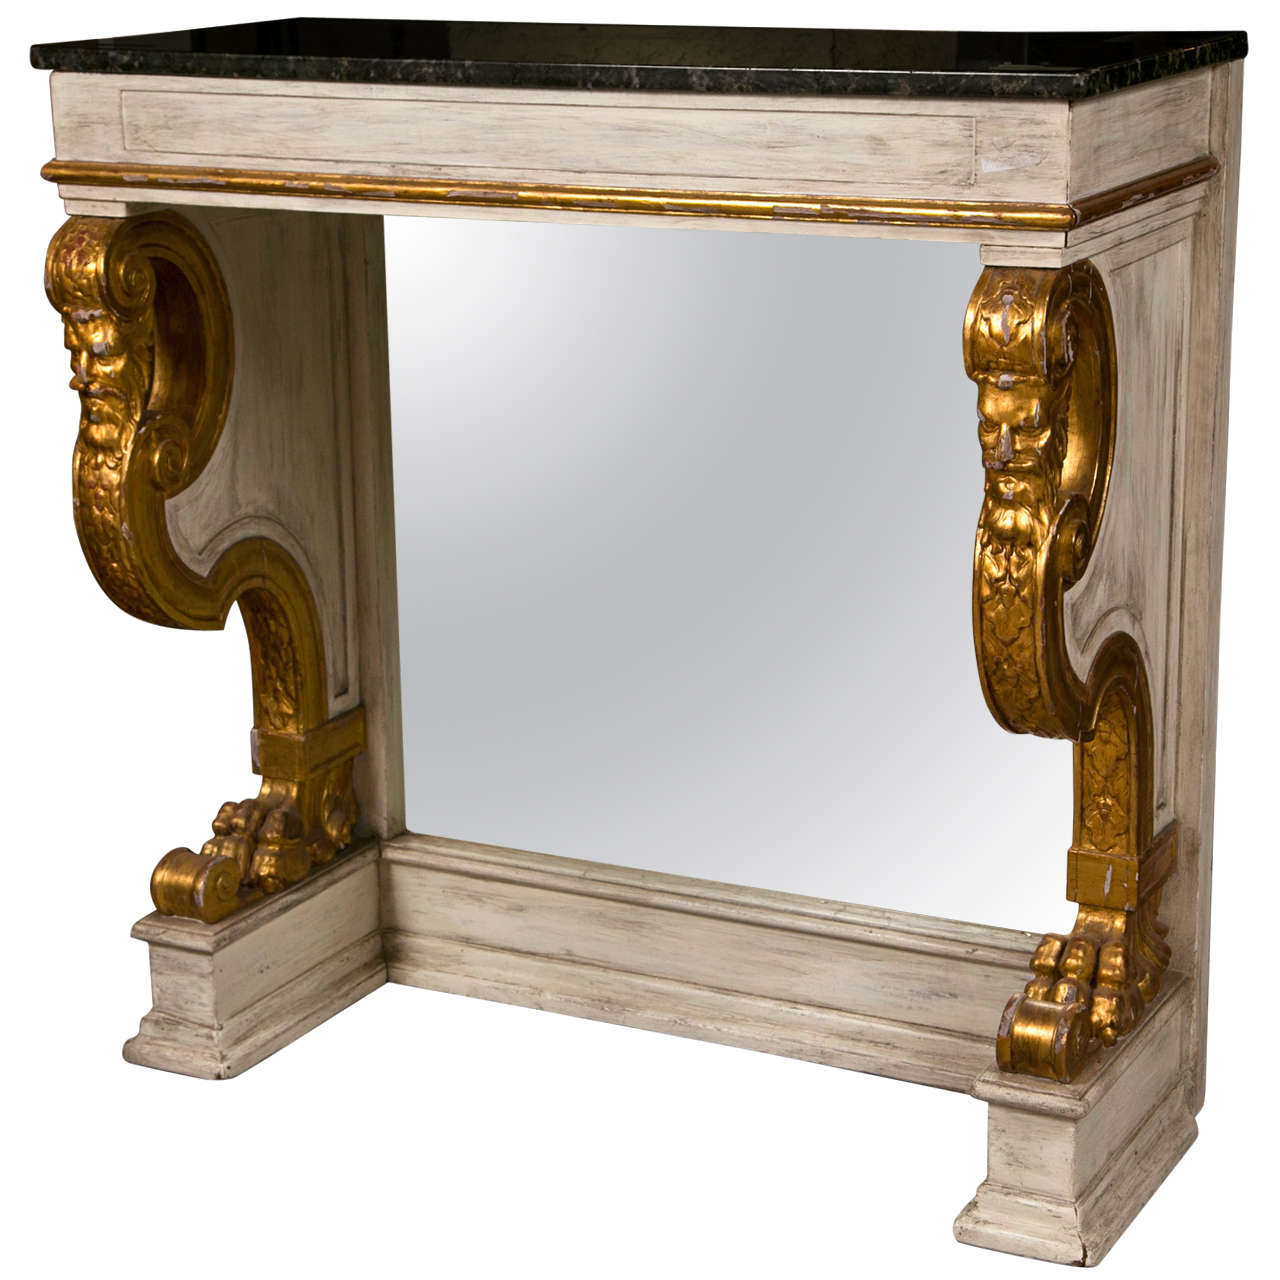 French Pier Console Table Jansen Mirrored Backsplat Marble Top Figural Motifs